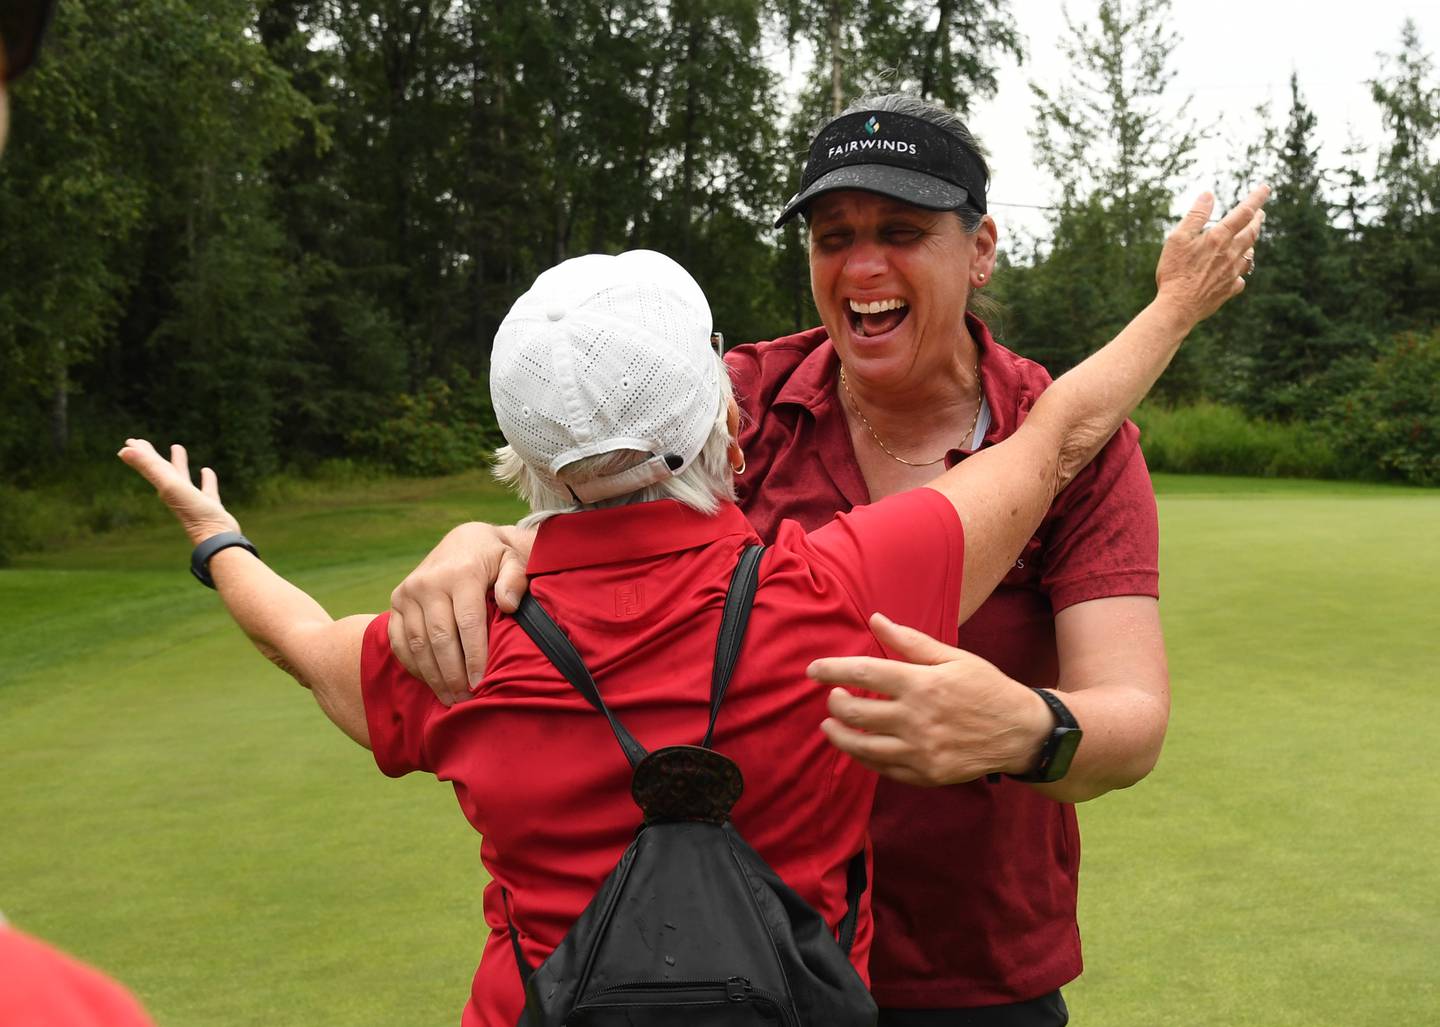 Golf, Anchorage Golf Course, USGA, 60th US Senior Women's Amateur Championships, Sue Wooster, Shelly Stouffer, Jackie Little